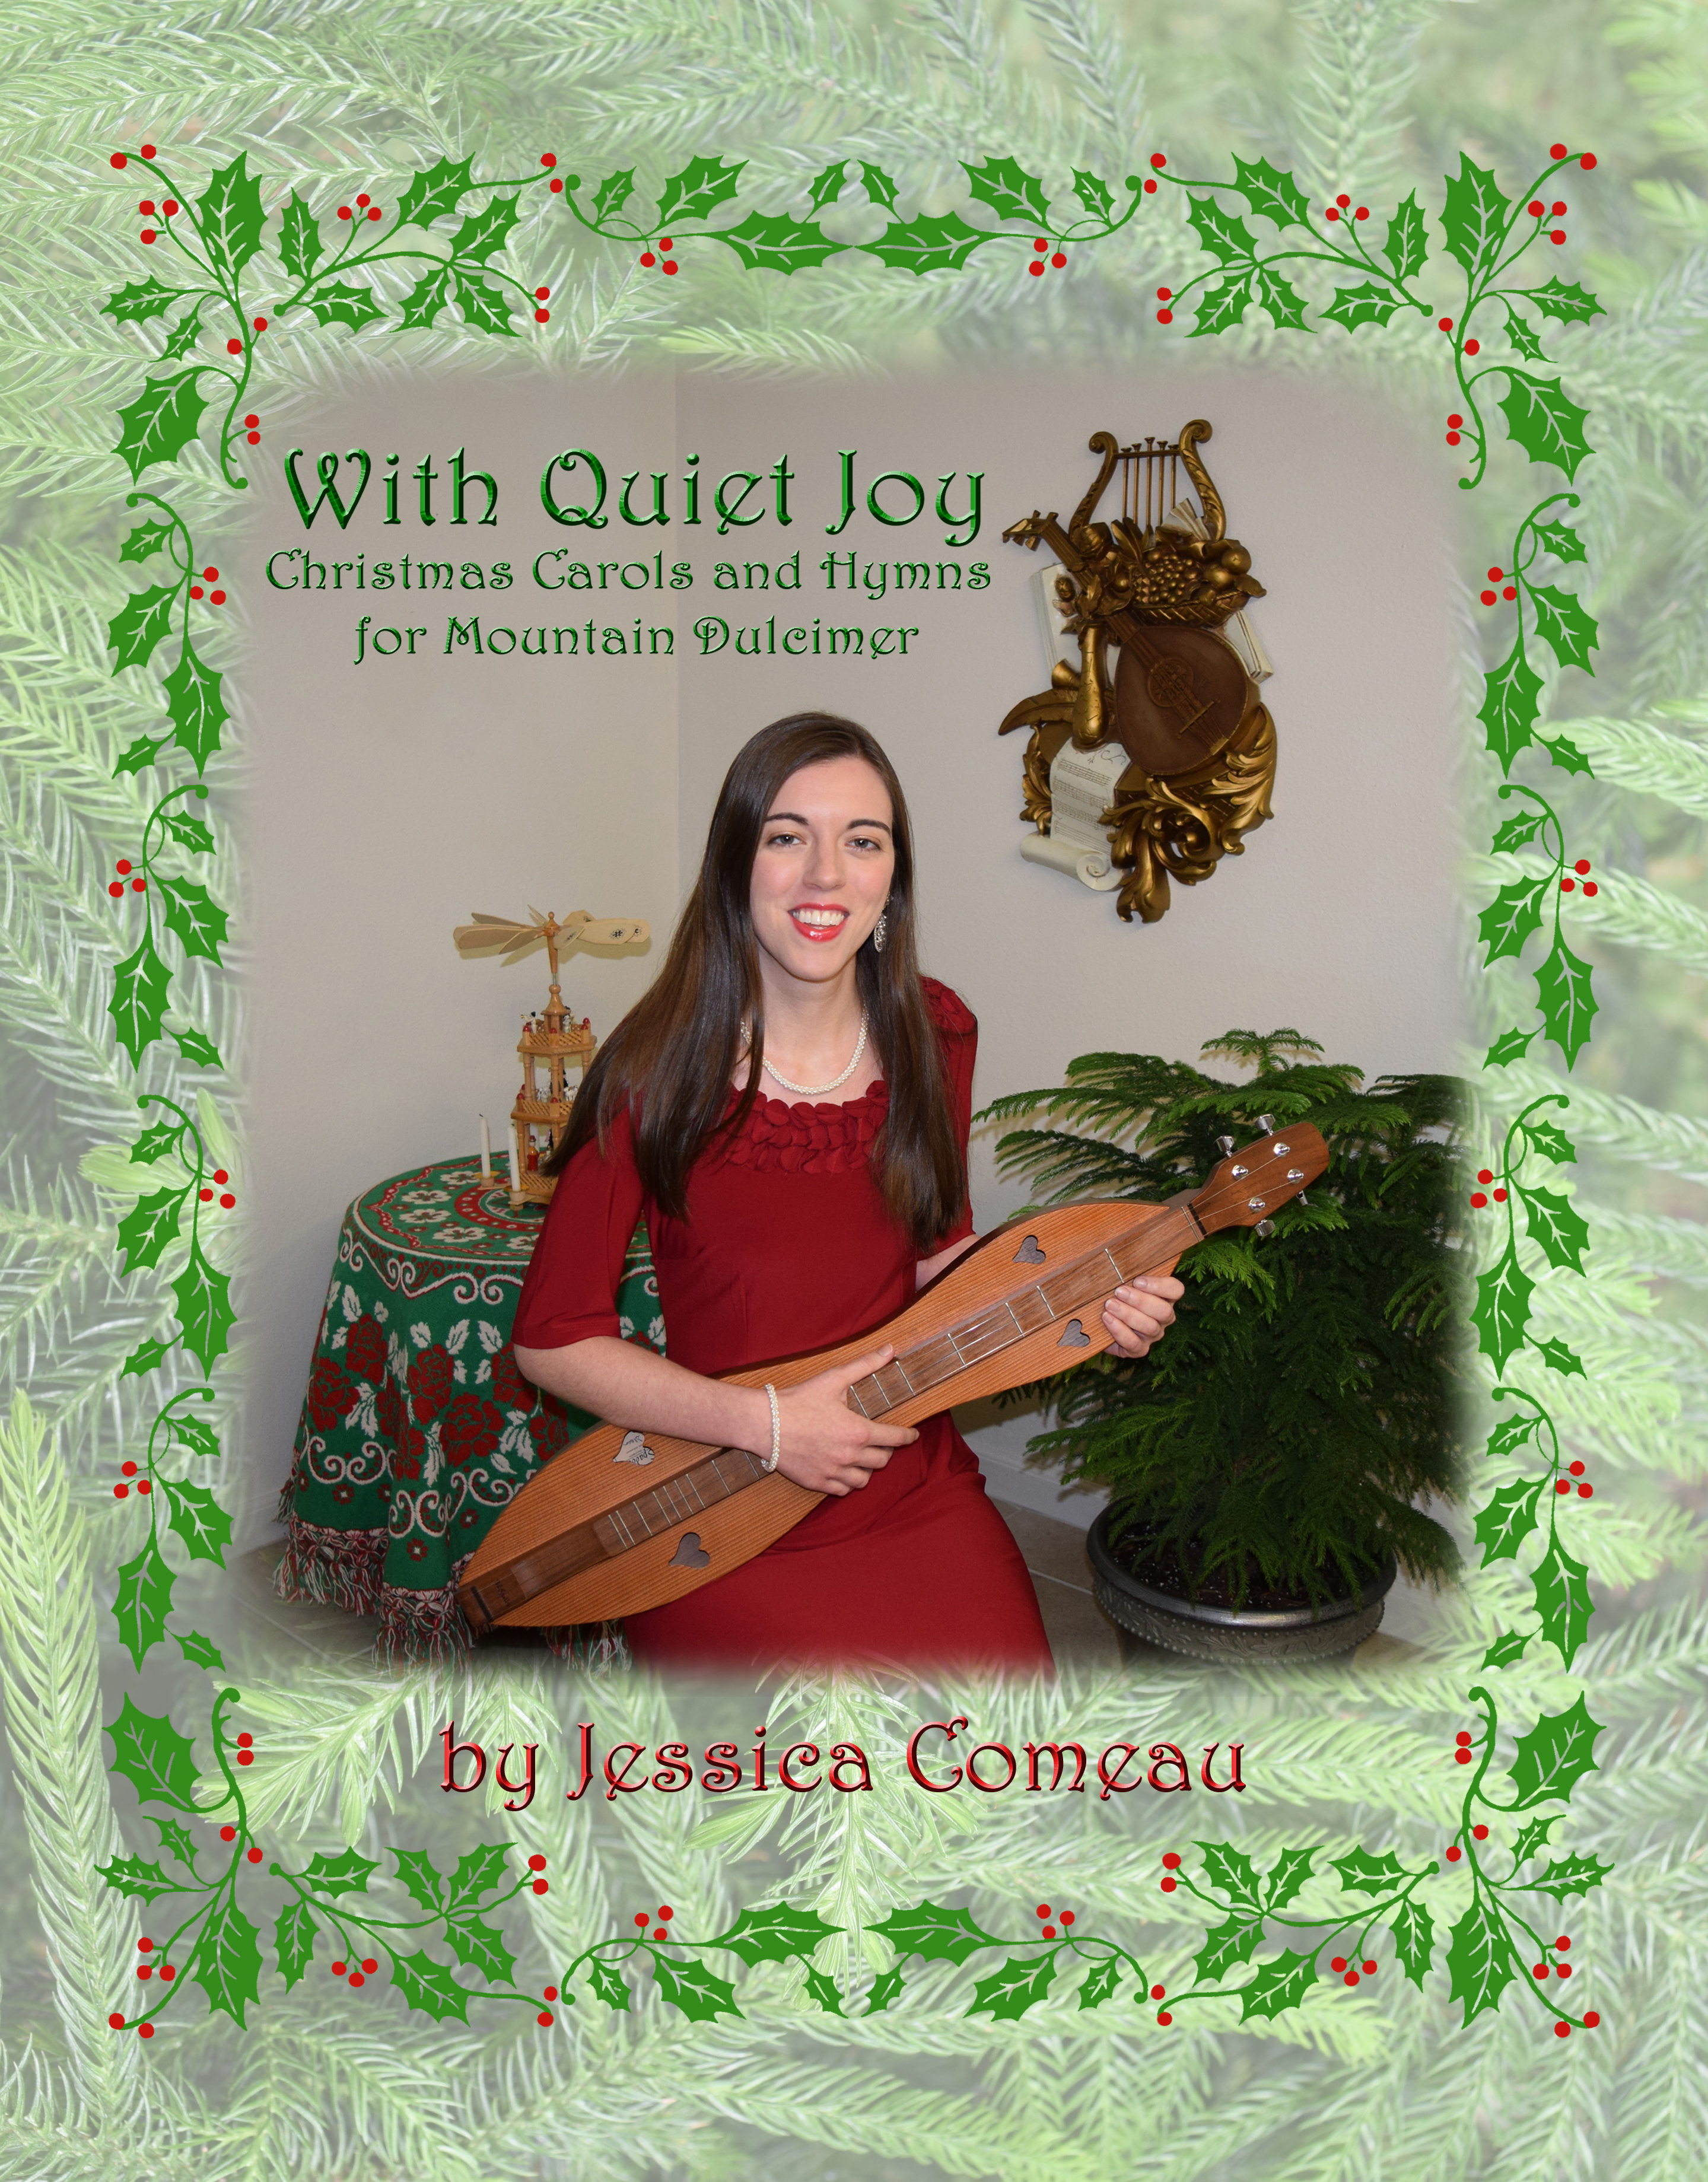 Jessica Comeau 's dulcimer tab book With Quiet Joy: Christmas Carols and Hymns for Mountain Dulcimer (2018)